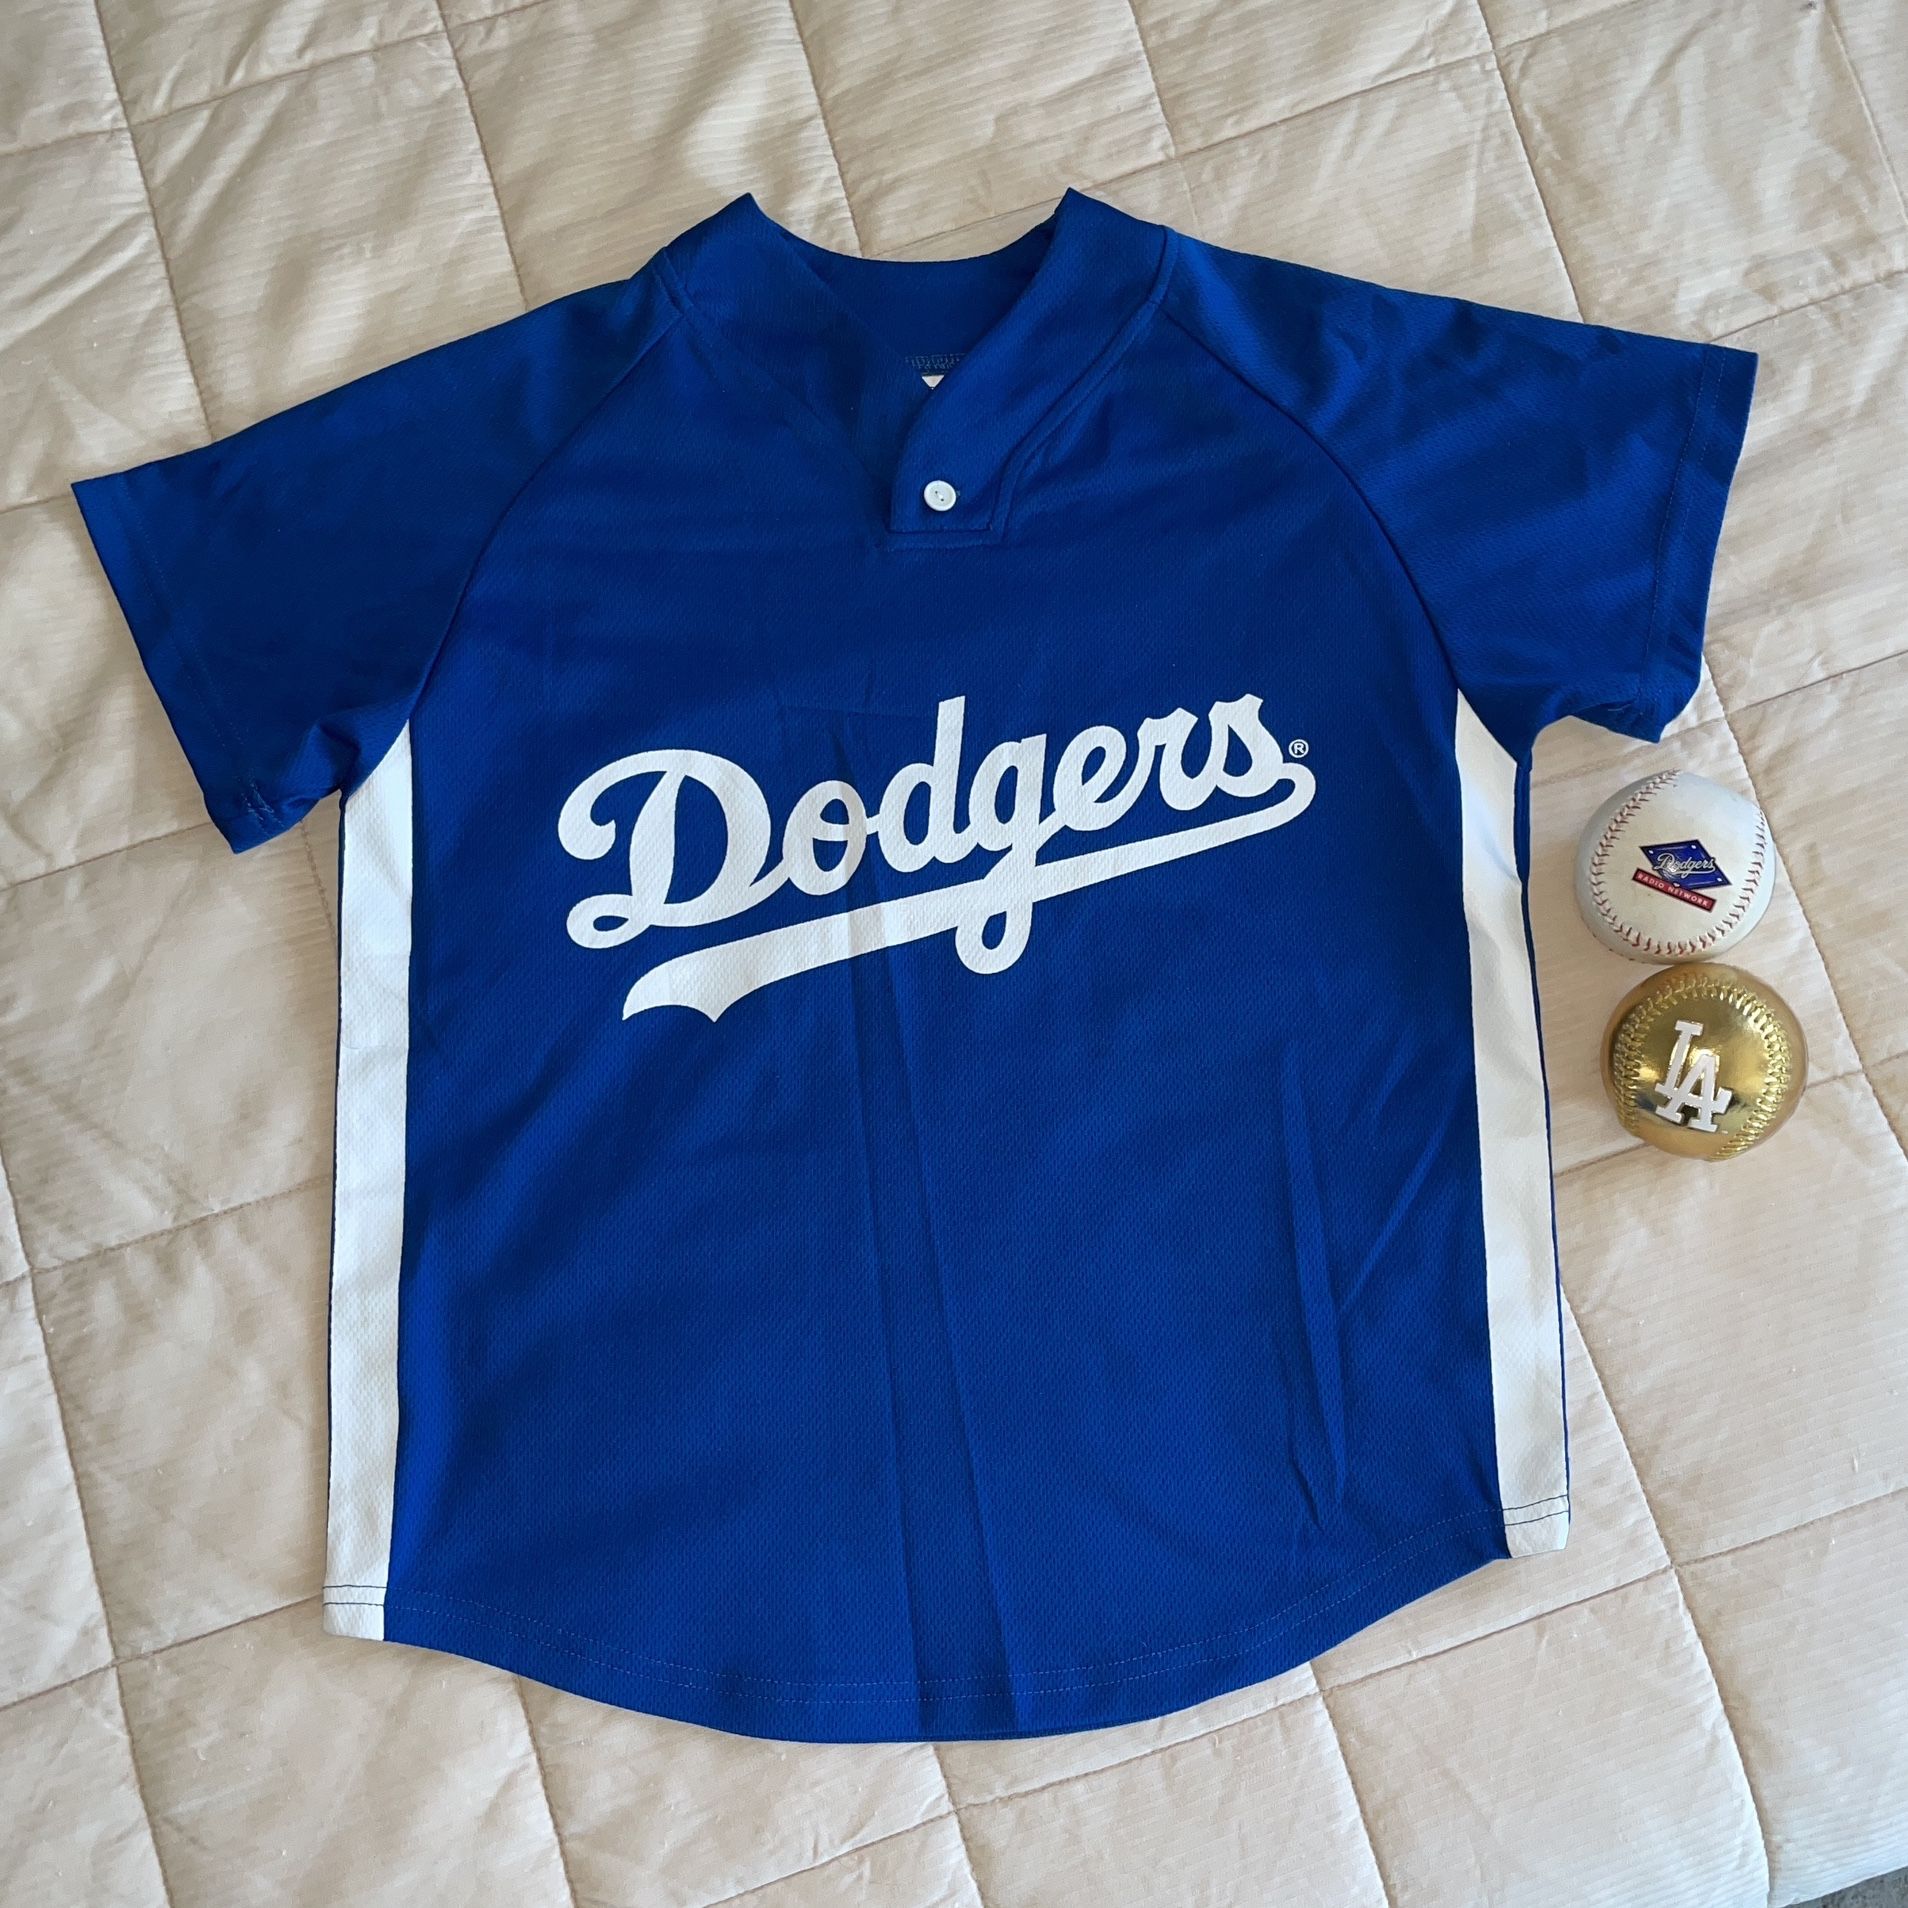 Dodgers Youth Jersey James Loney #7 for Sale in Los Angeles, CA